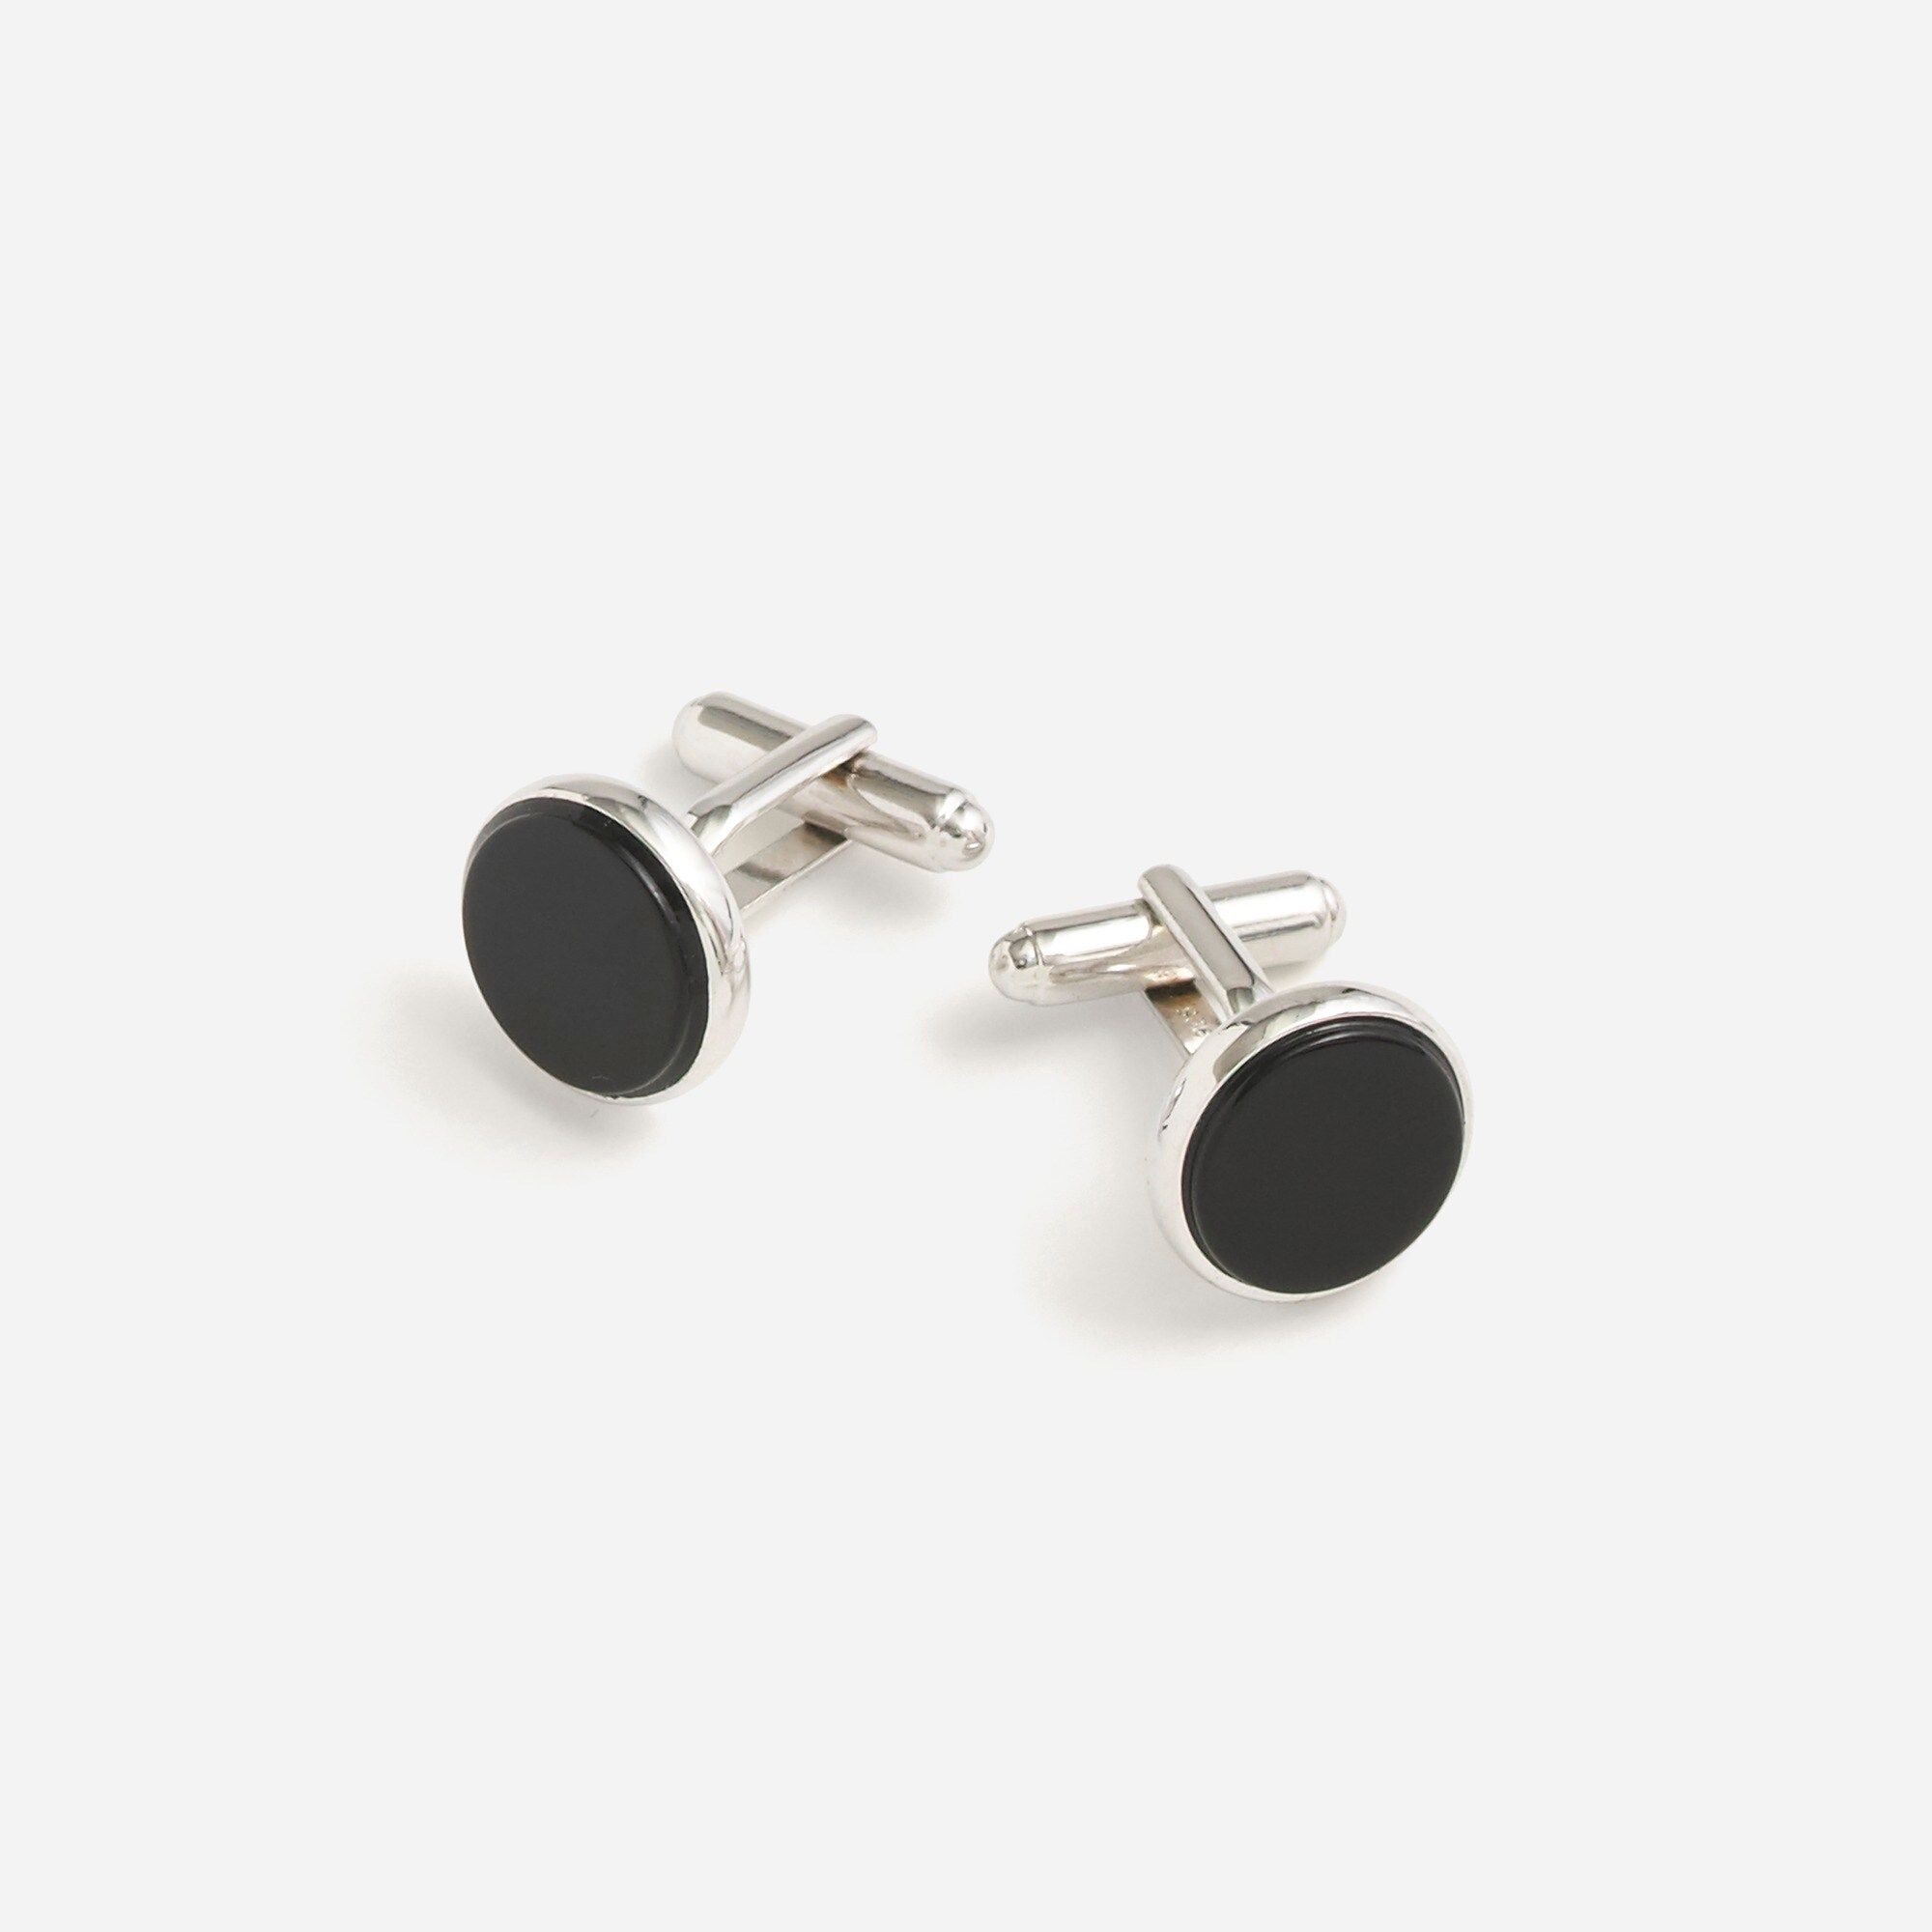 Black onyx sterling silver rounded cuff links | J.Crew US